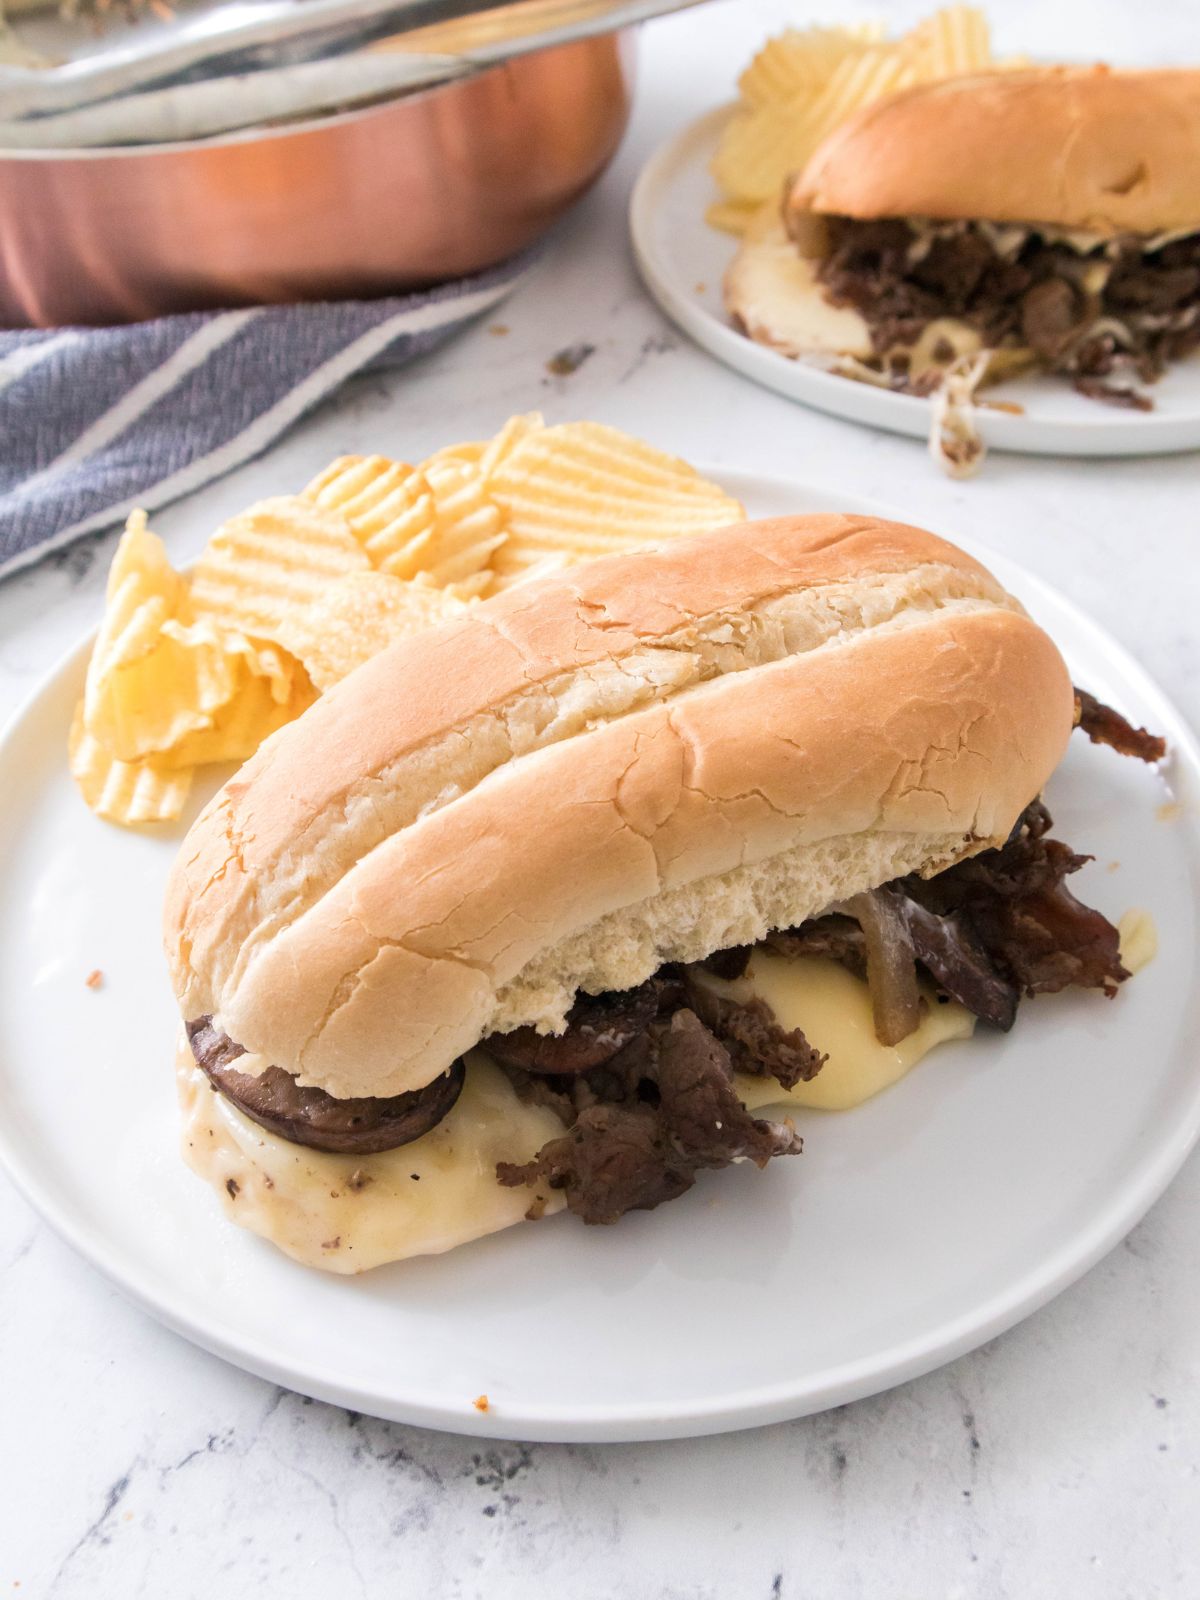 Philly Cheesesteak on white plate.